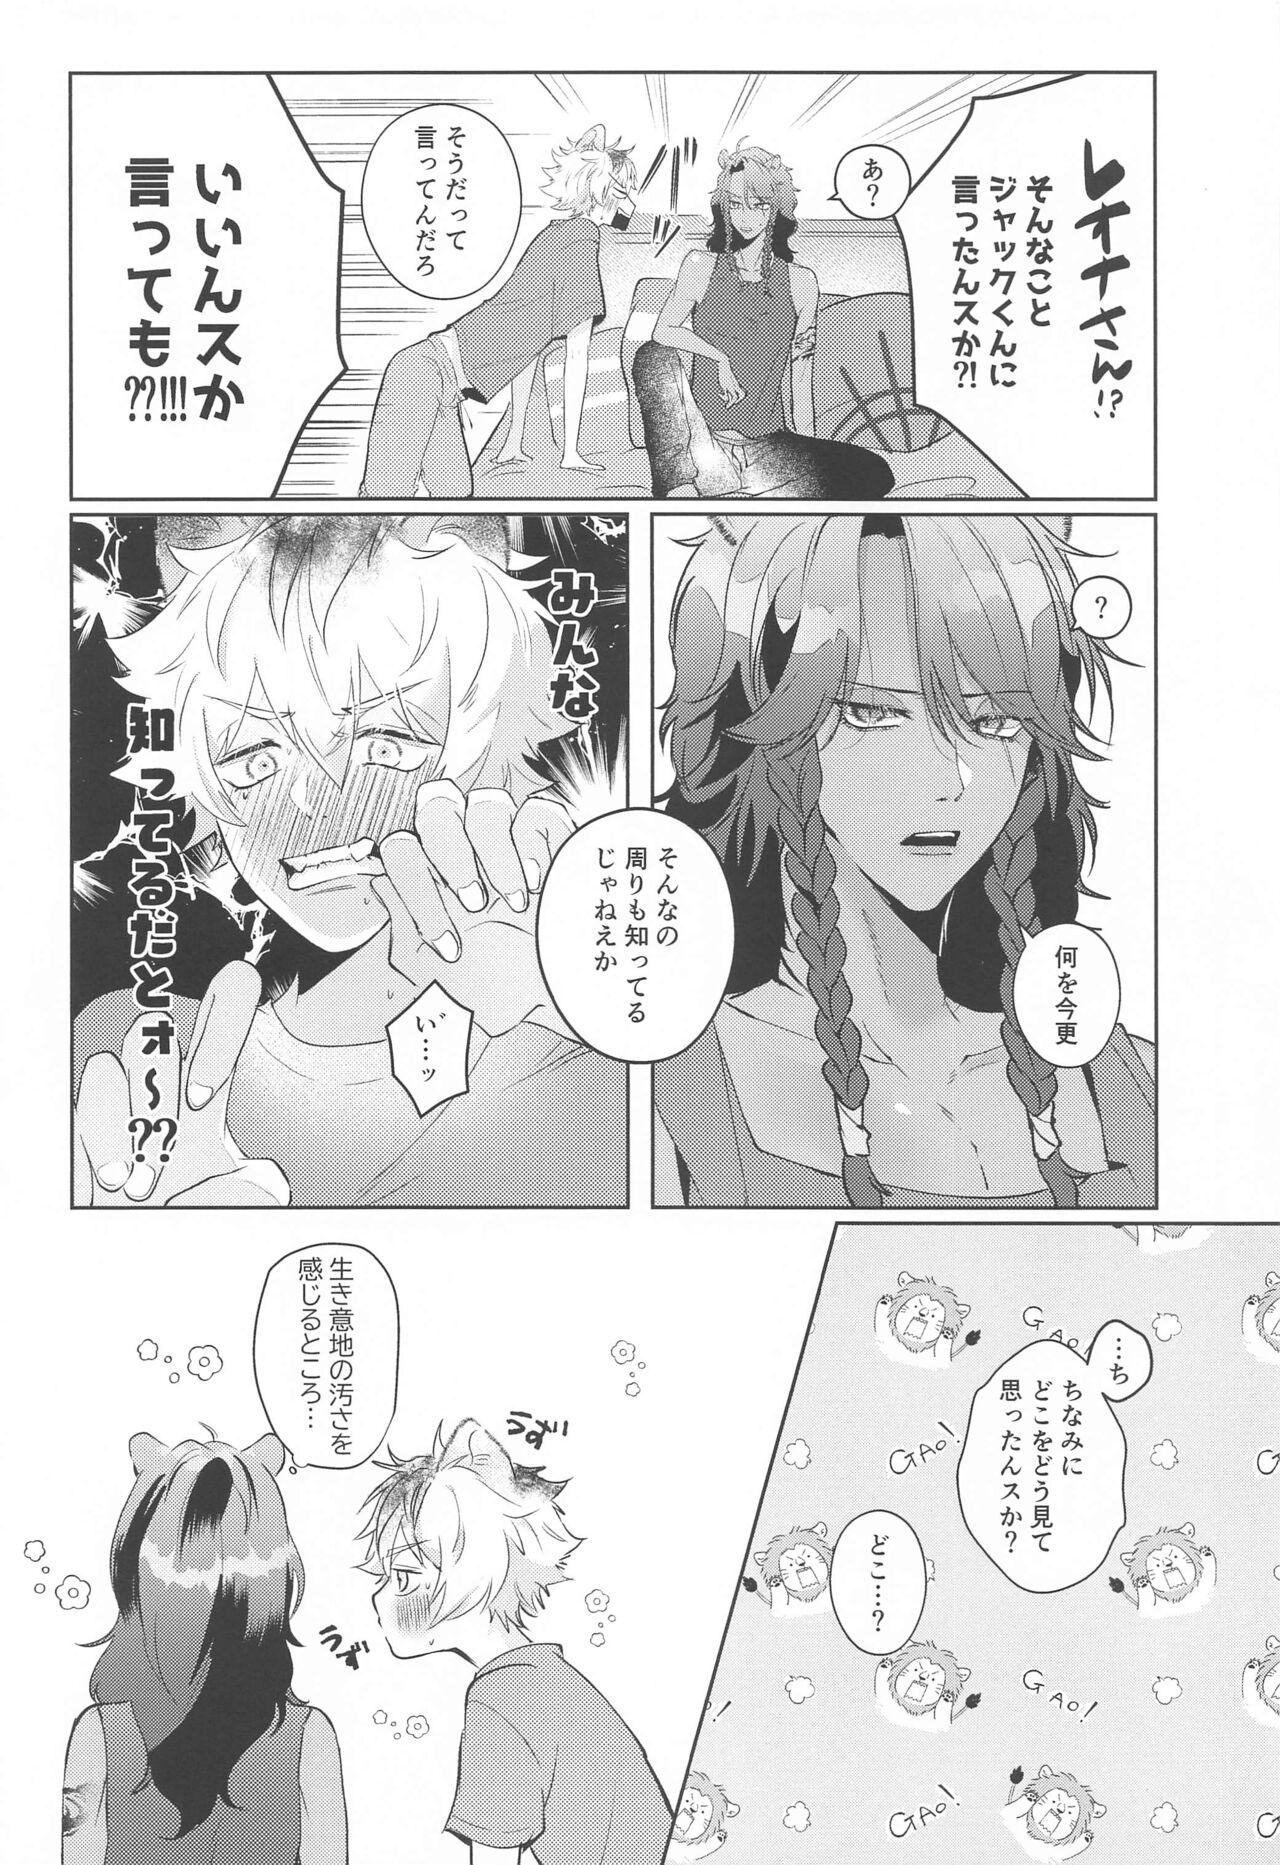 Gorgeous Kanchigai Over Run!! - over run from a misunderstanding - Disney twisted-wonderland Fisting - Page 7